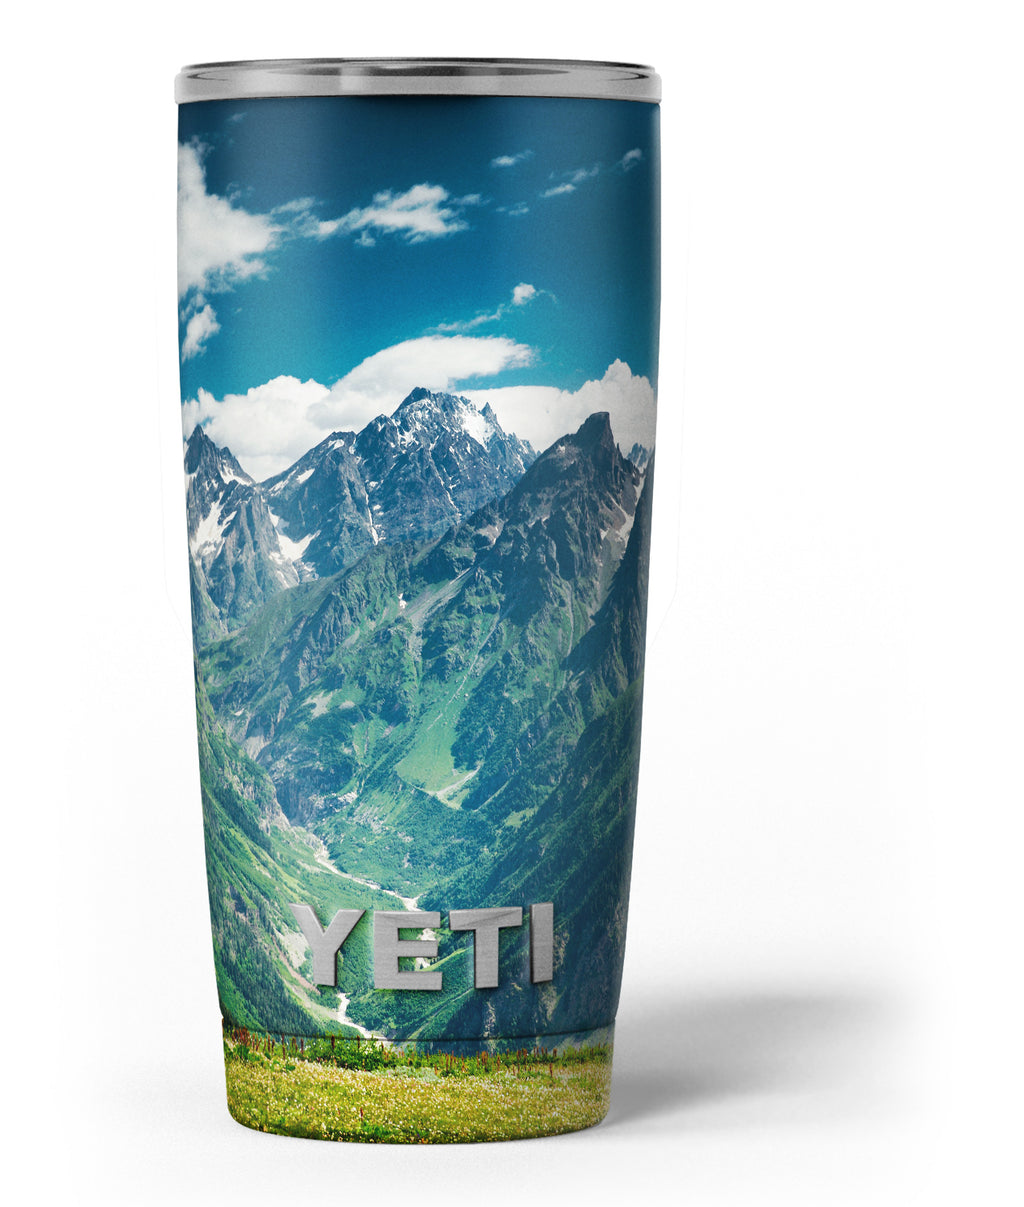 Wood Collection of Skins For Yeti Rambler 16 oz. Stackable Pints (2 Pack) 